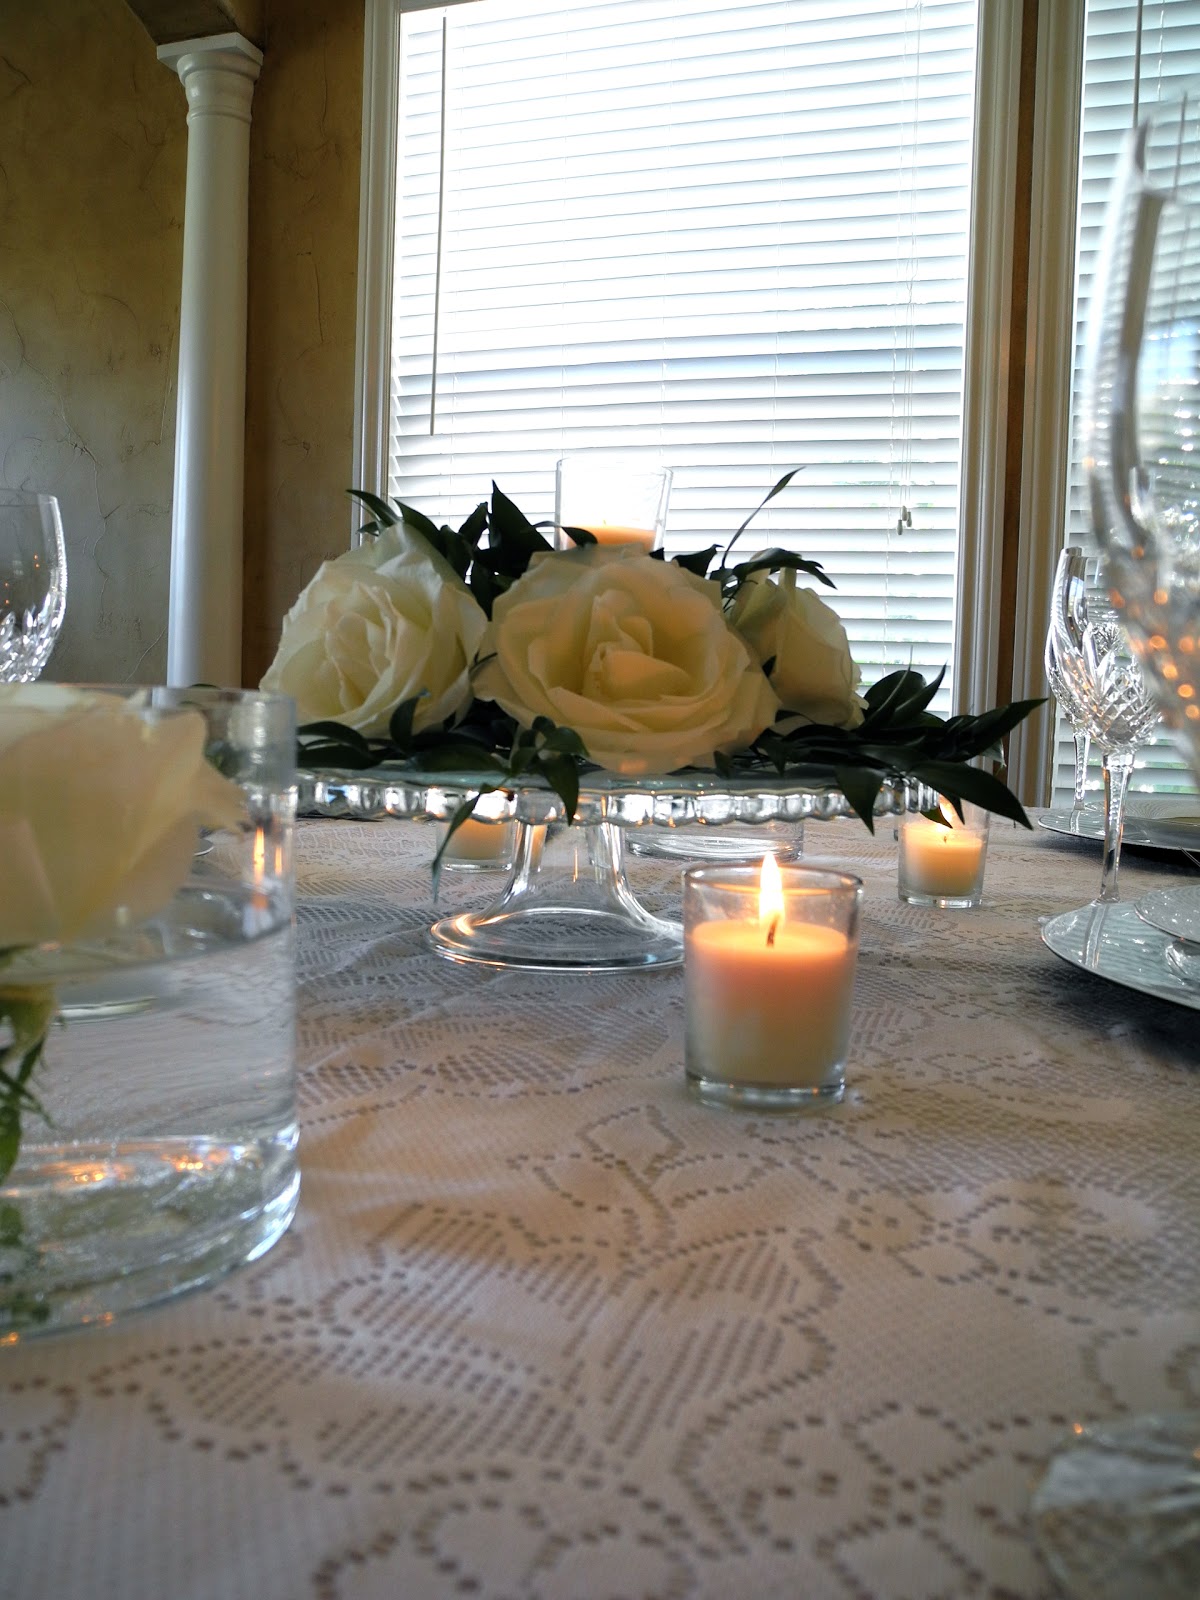 flower and candle centerpieces